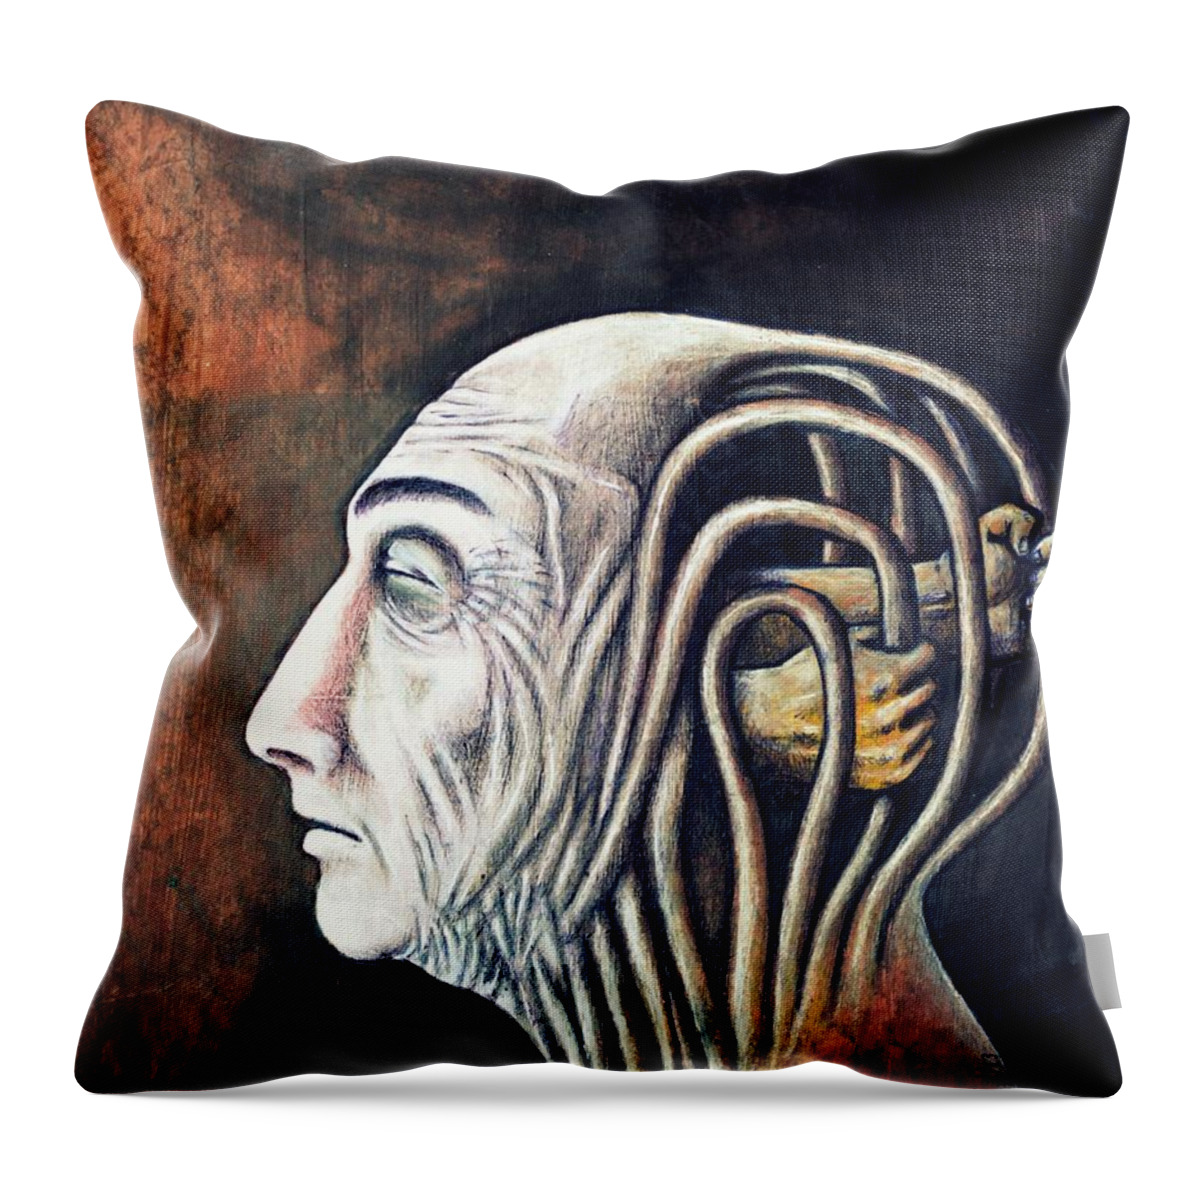 Mental Prison Throw Pillow featuring the digital art Freedom Of Compulsions Habits And Addictions by Paulo Zerbato